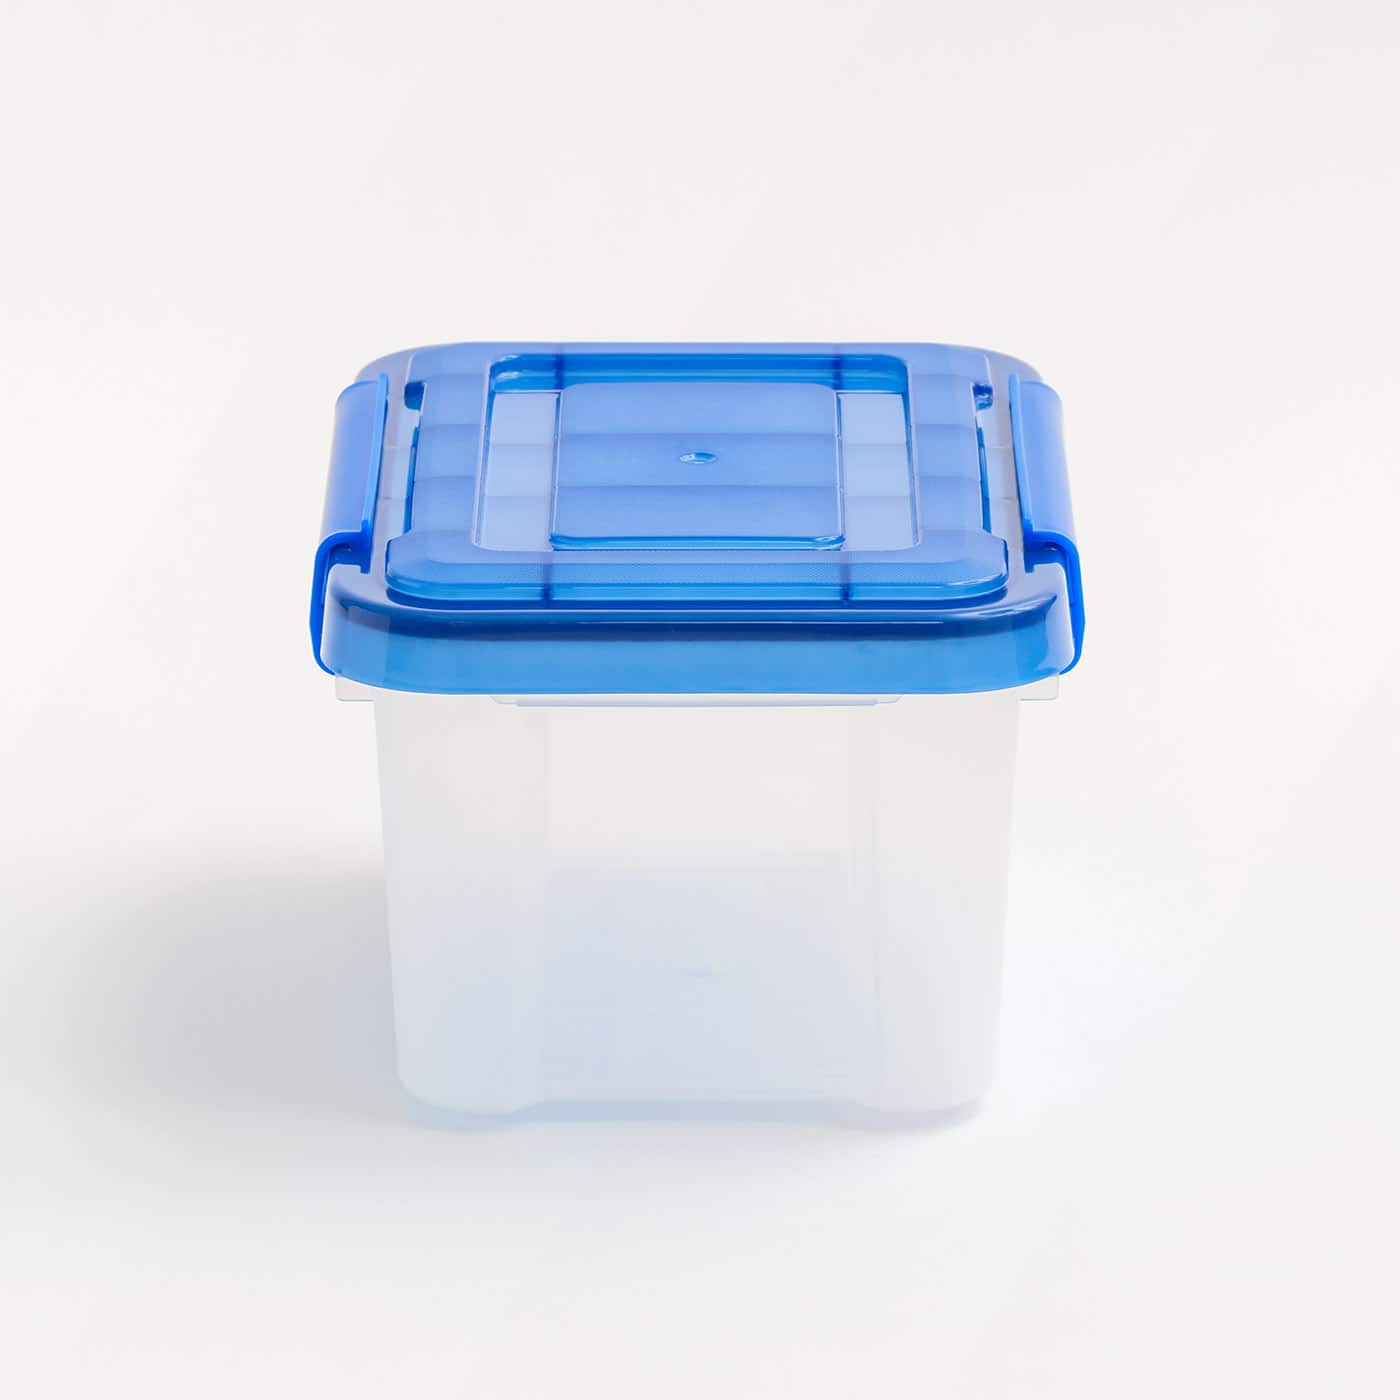 10 Nearly New Plastic Storage Crates Box Container 10L Blue with Label Pouch 